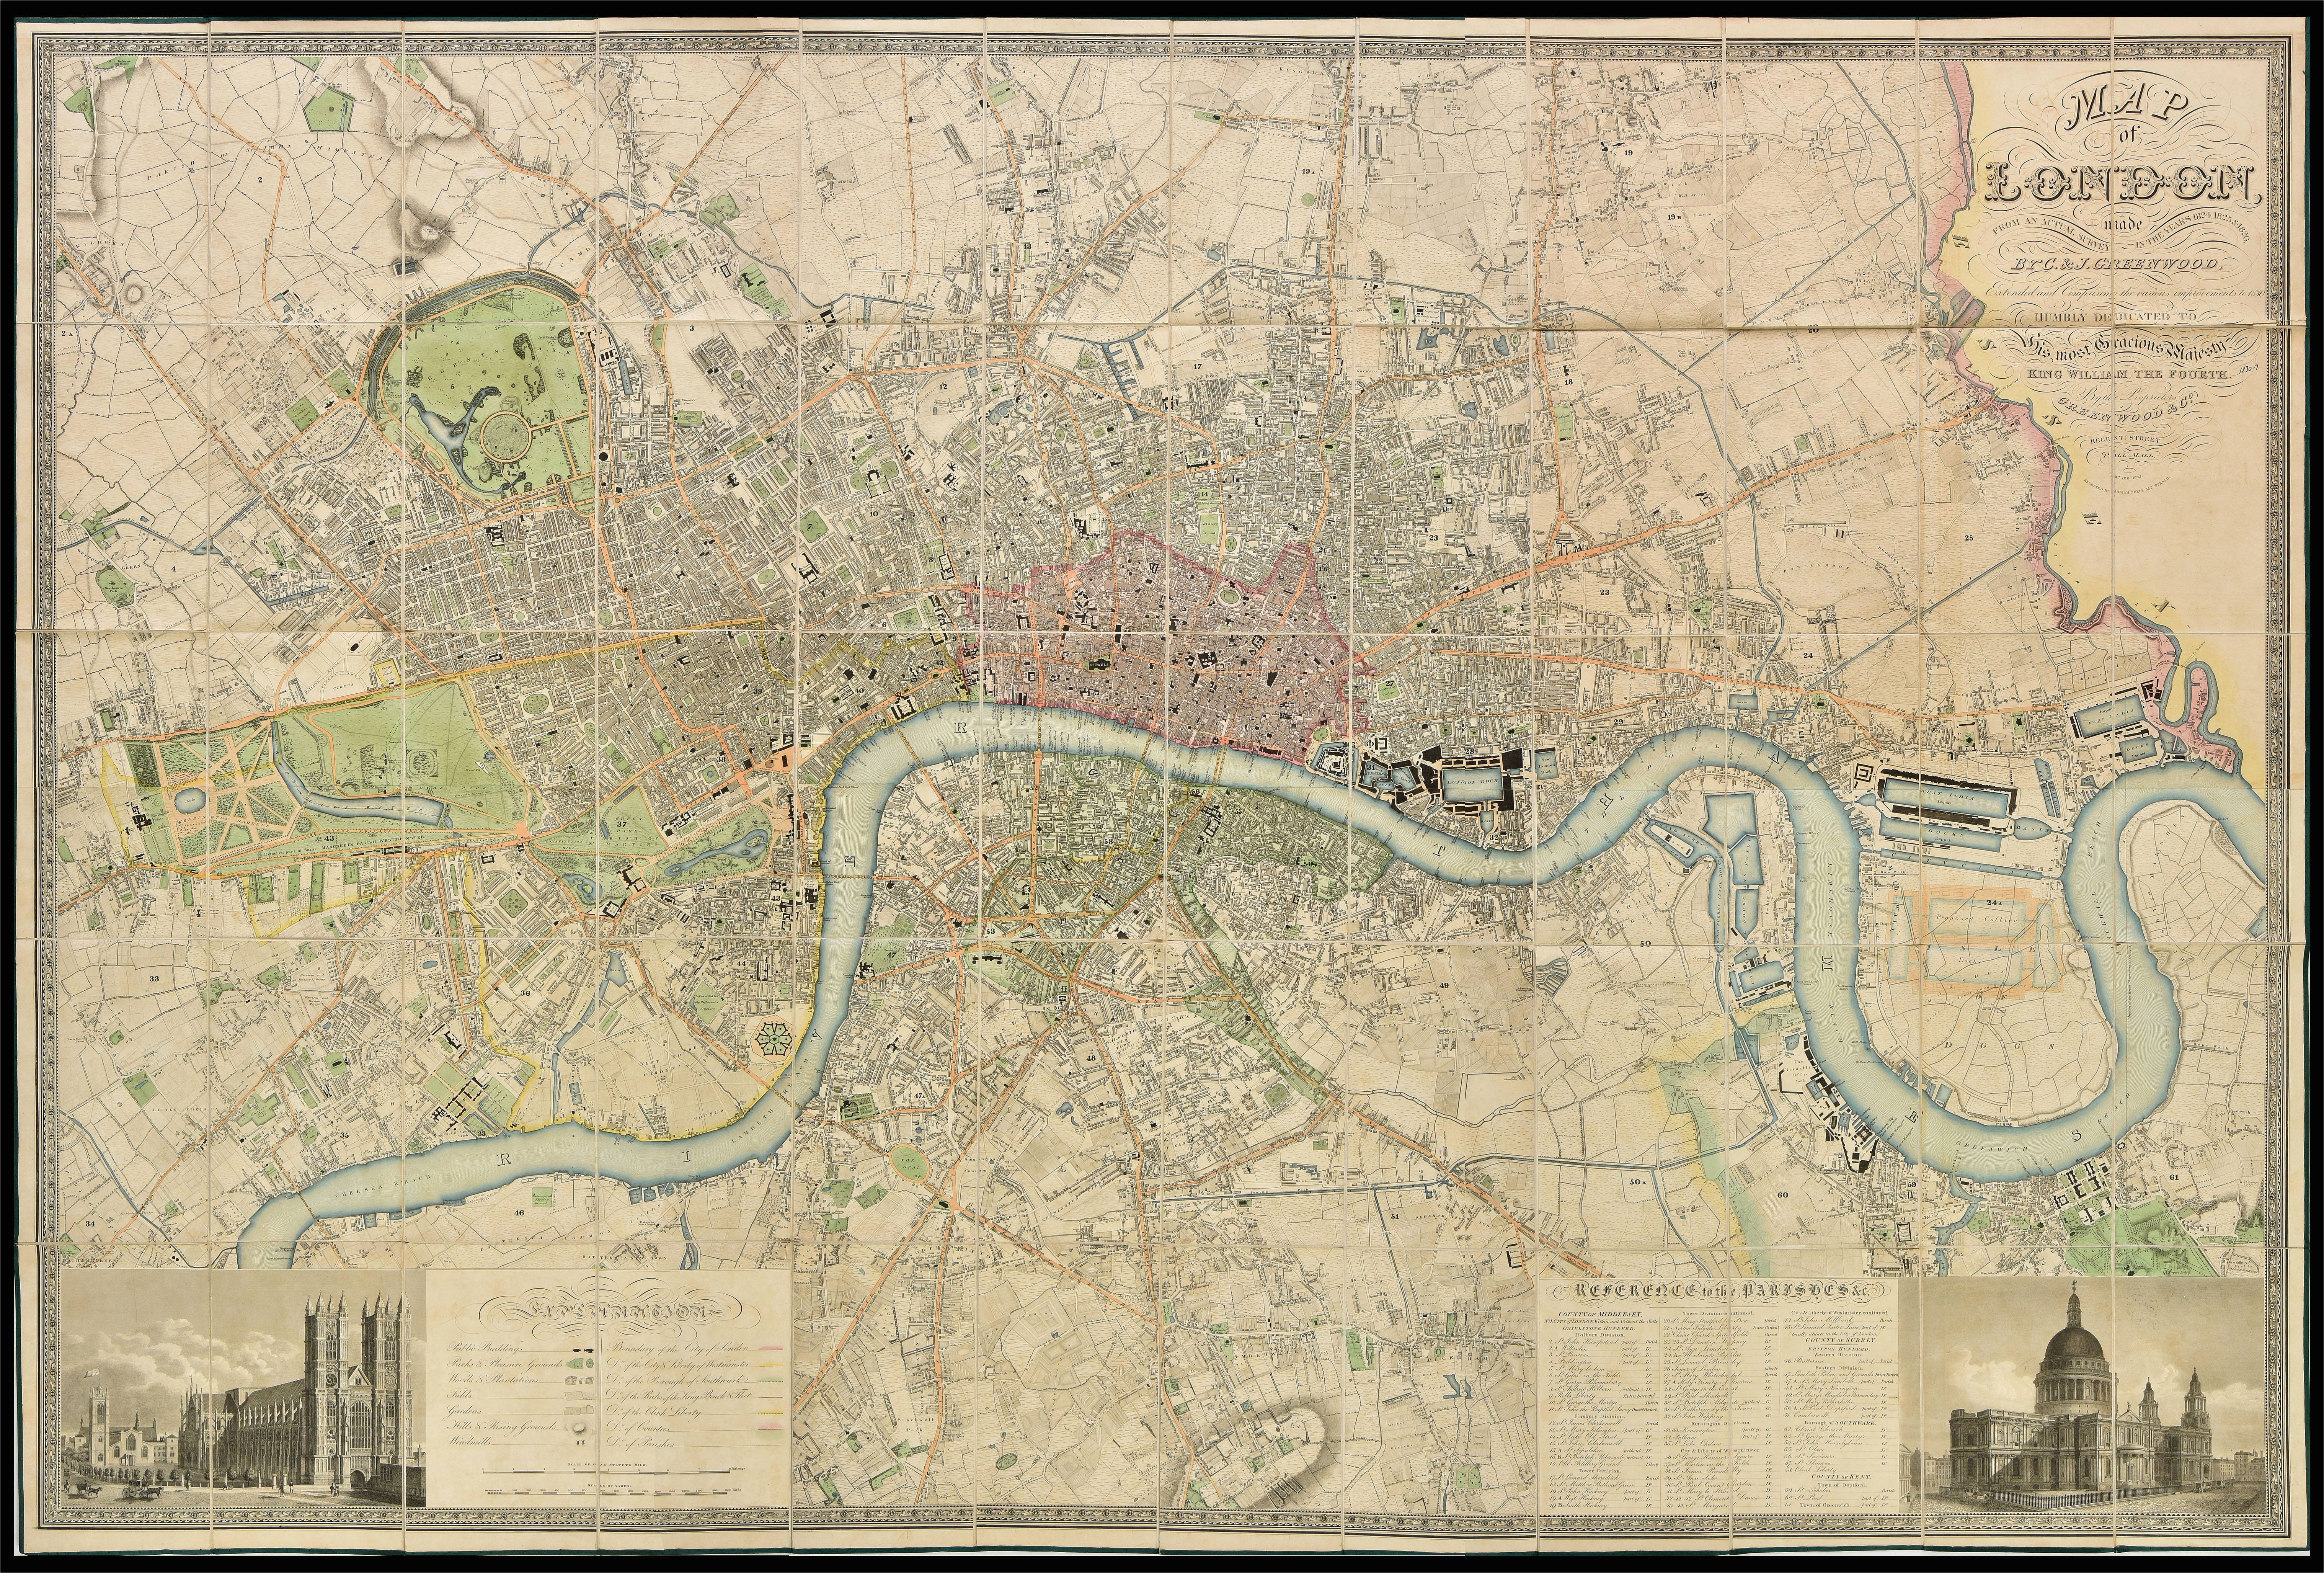 fascinating 1830 map shows how vast swathes of the capital were